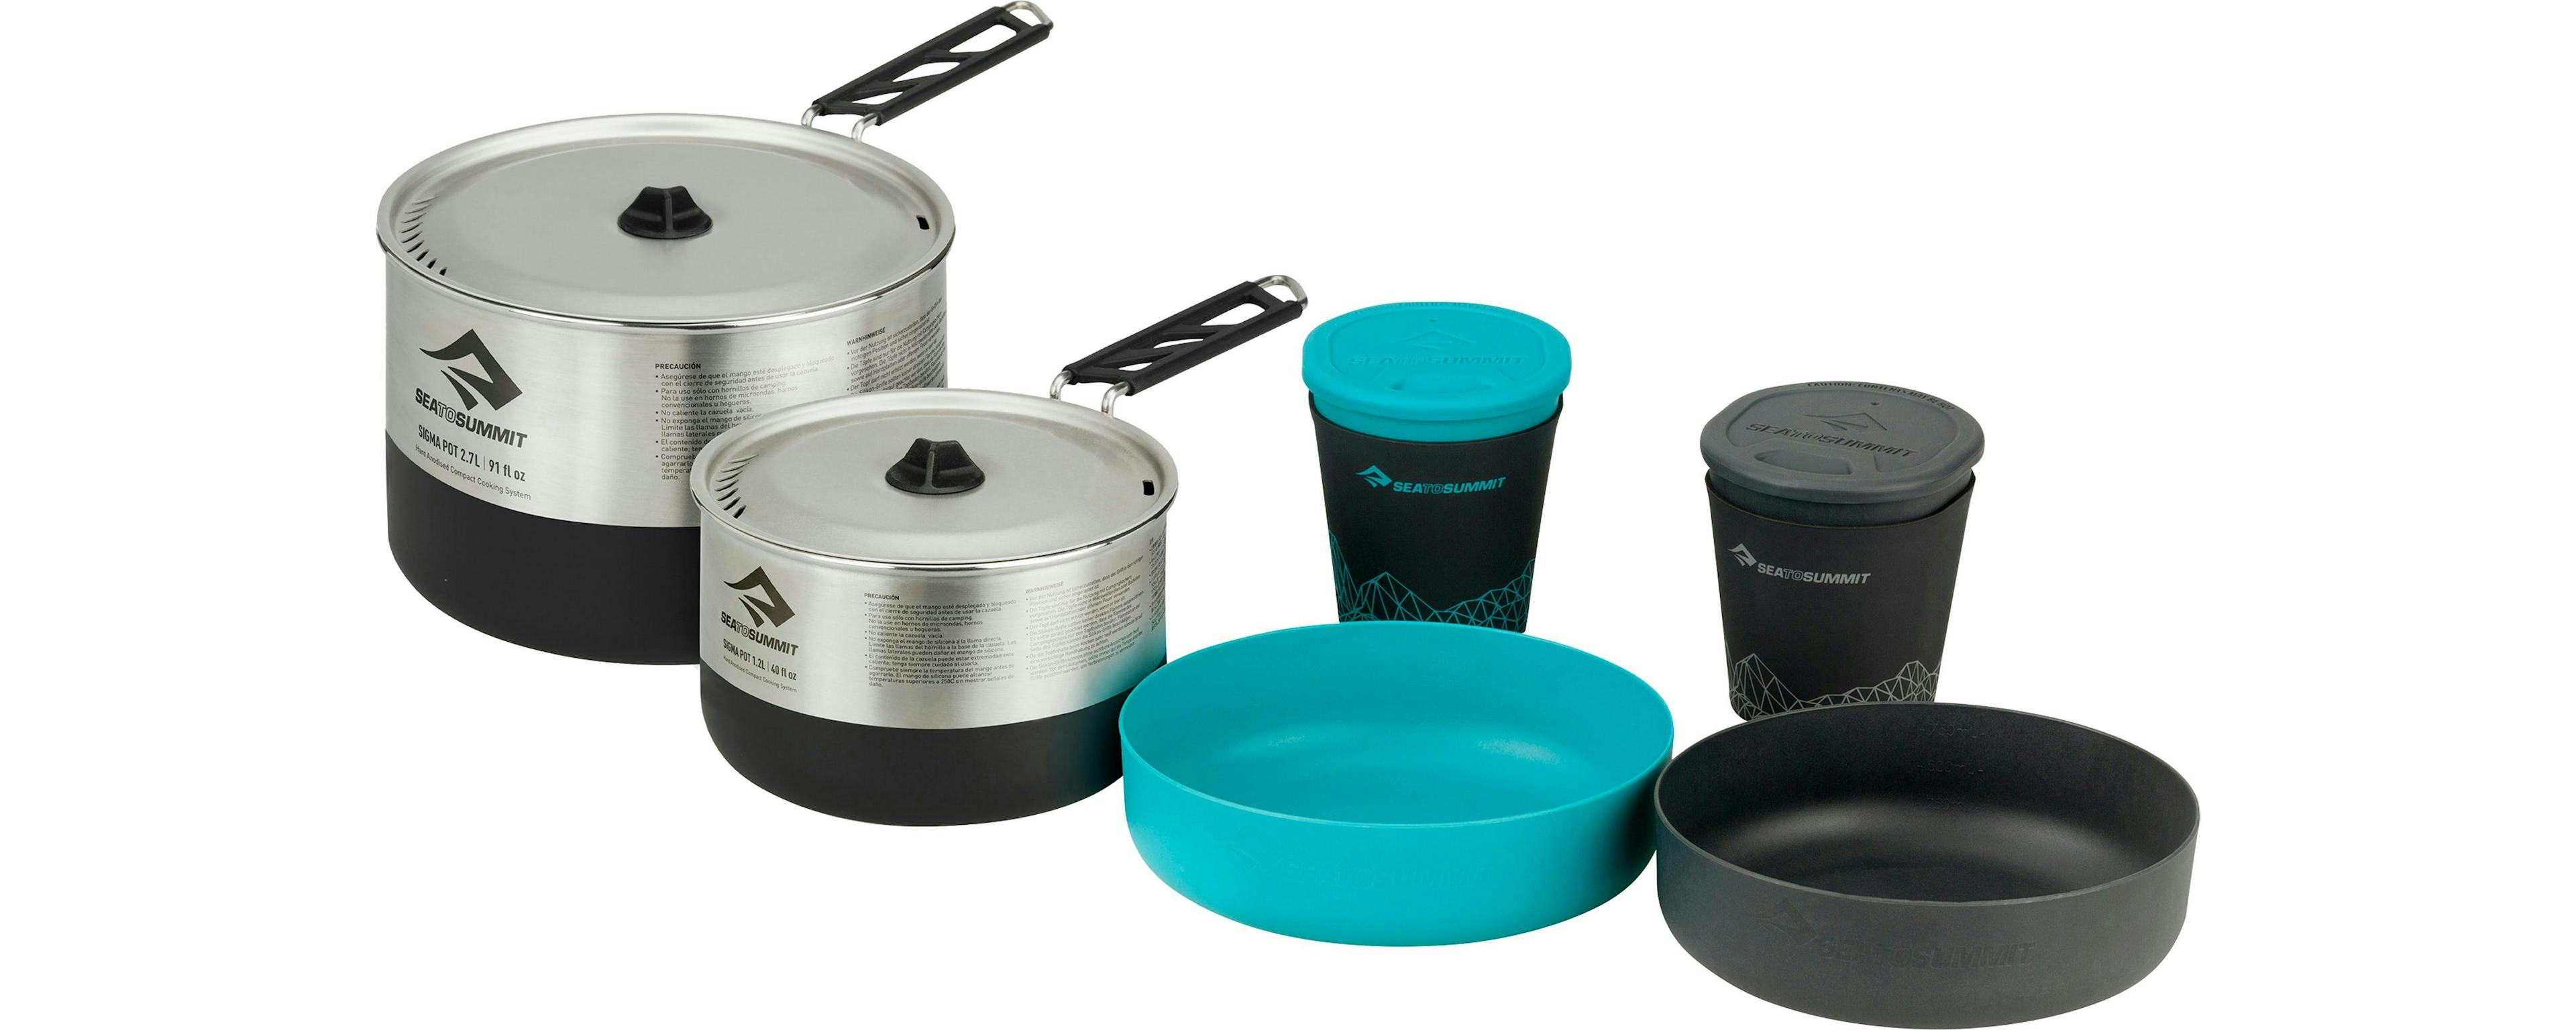 Outdoor cookset with two bowls and cups